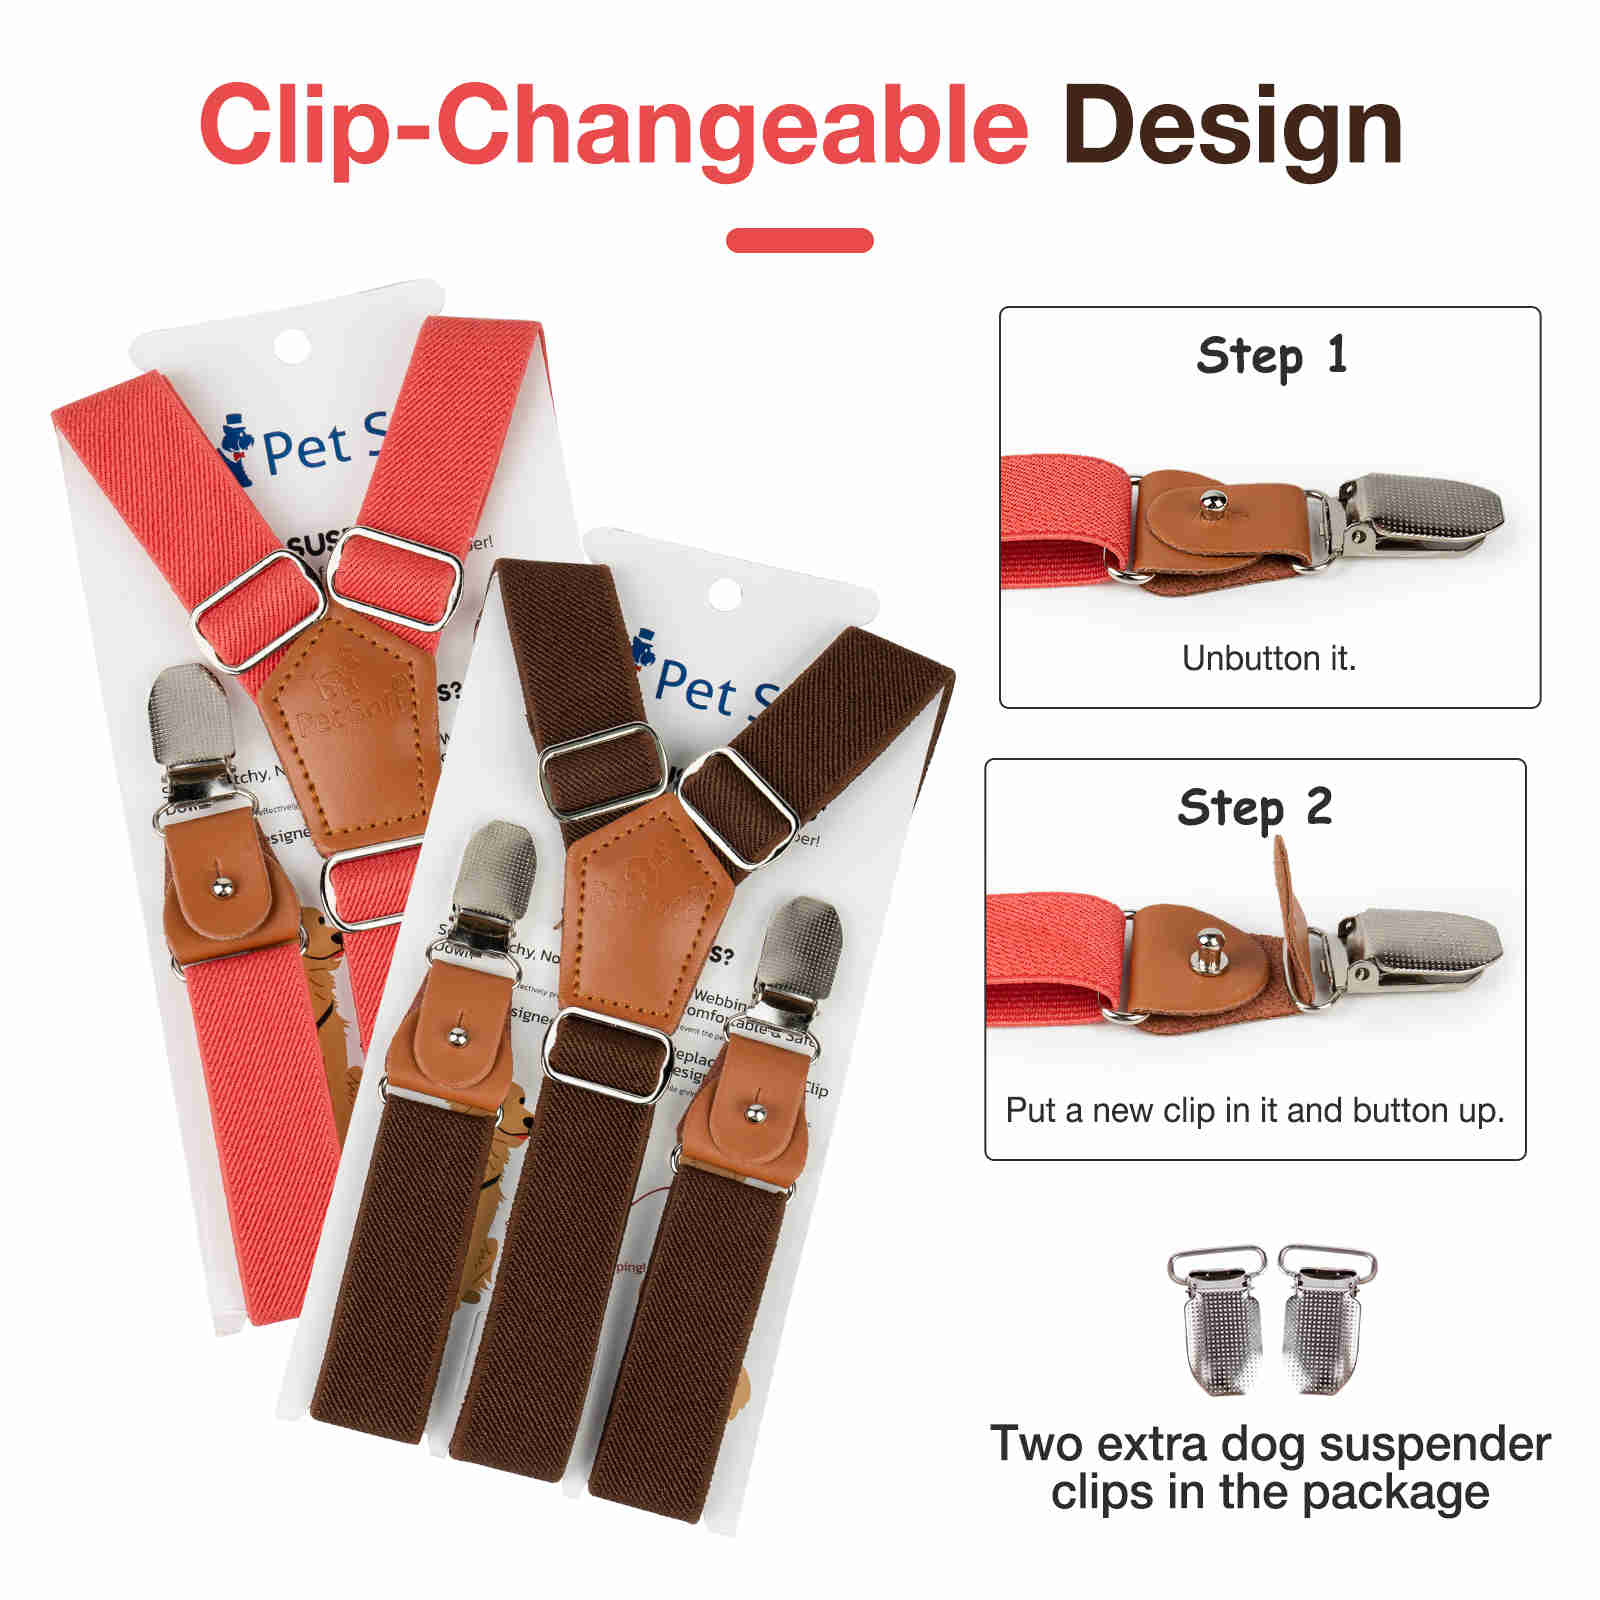 Dog Diaper Keeper For Male Dog And Female Dog Diapers, 2 Pcs/ Pack (Red & Brown)